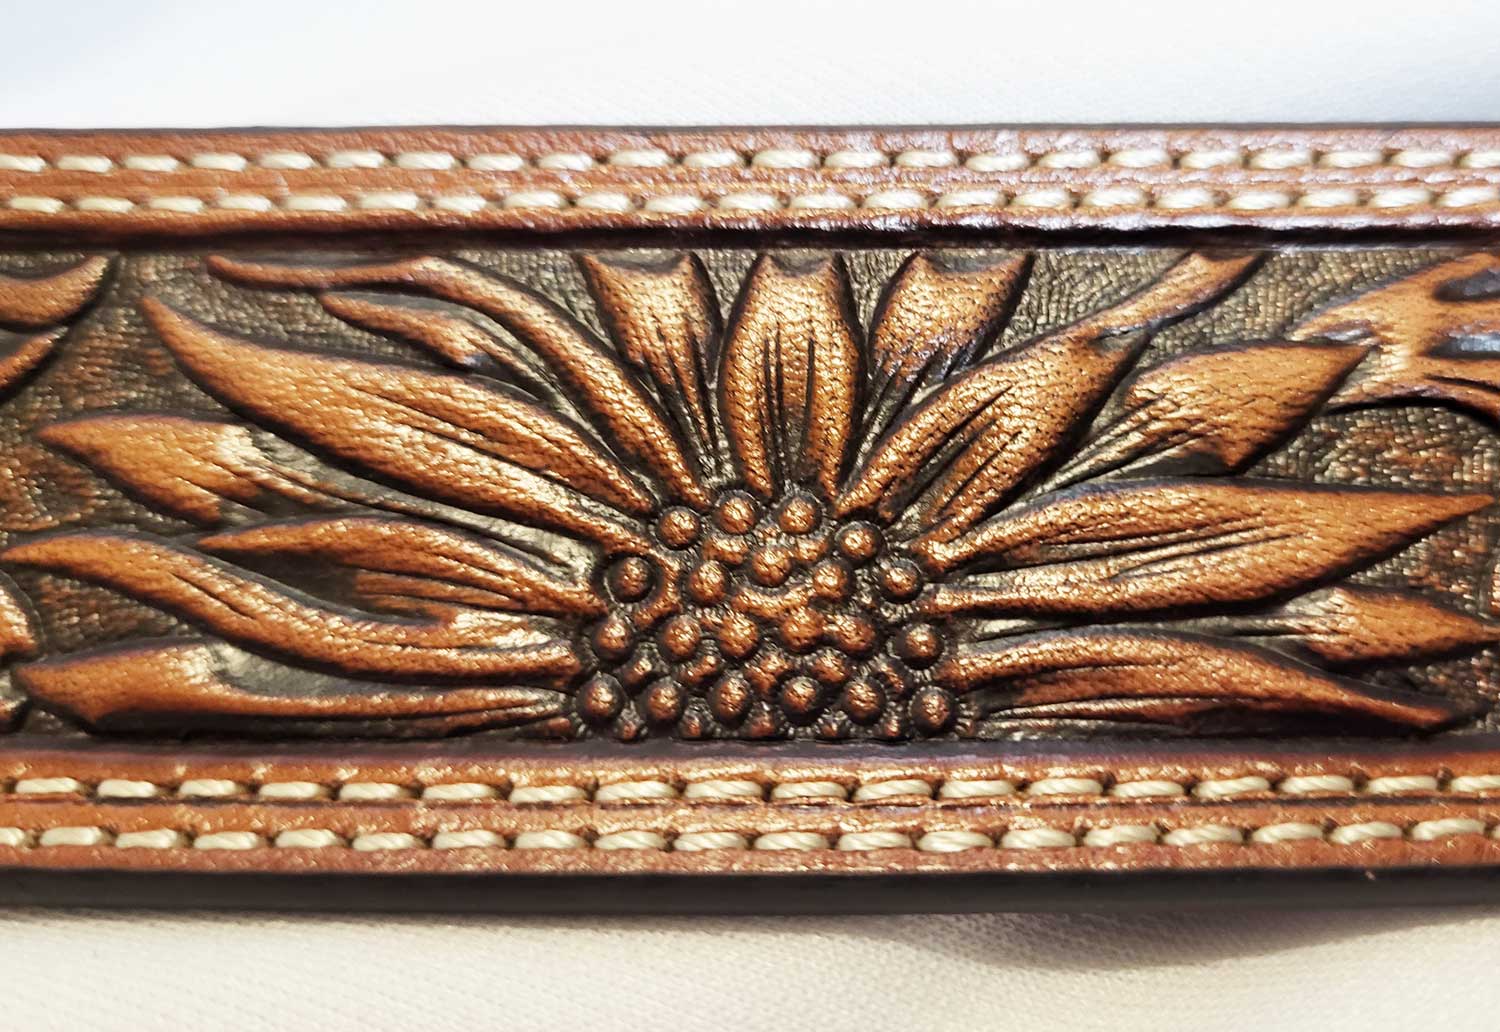 Nocona Western Belt with Rich Sunflower Tooling